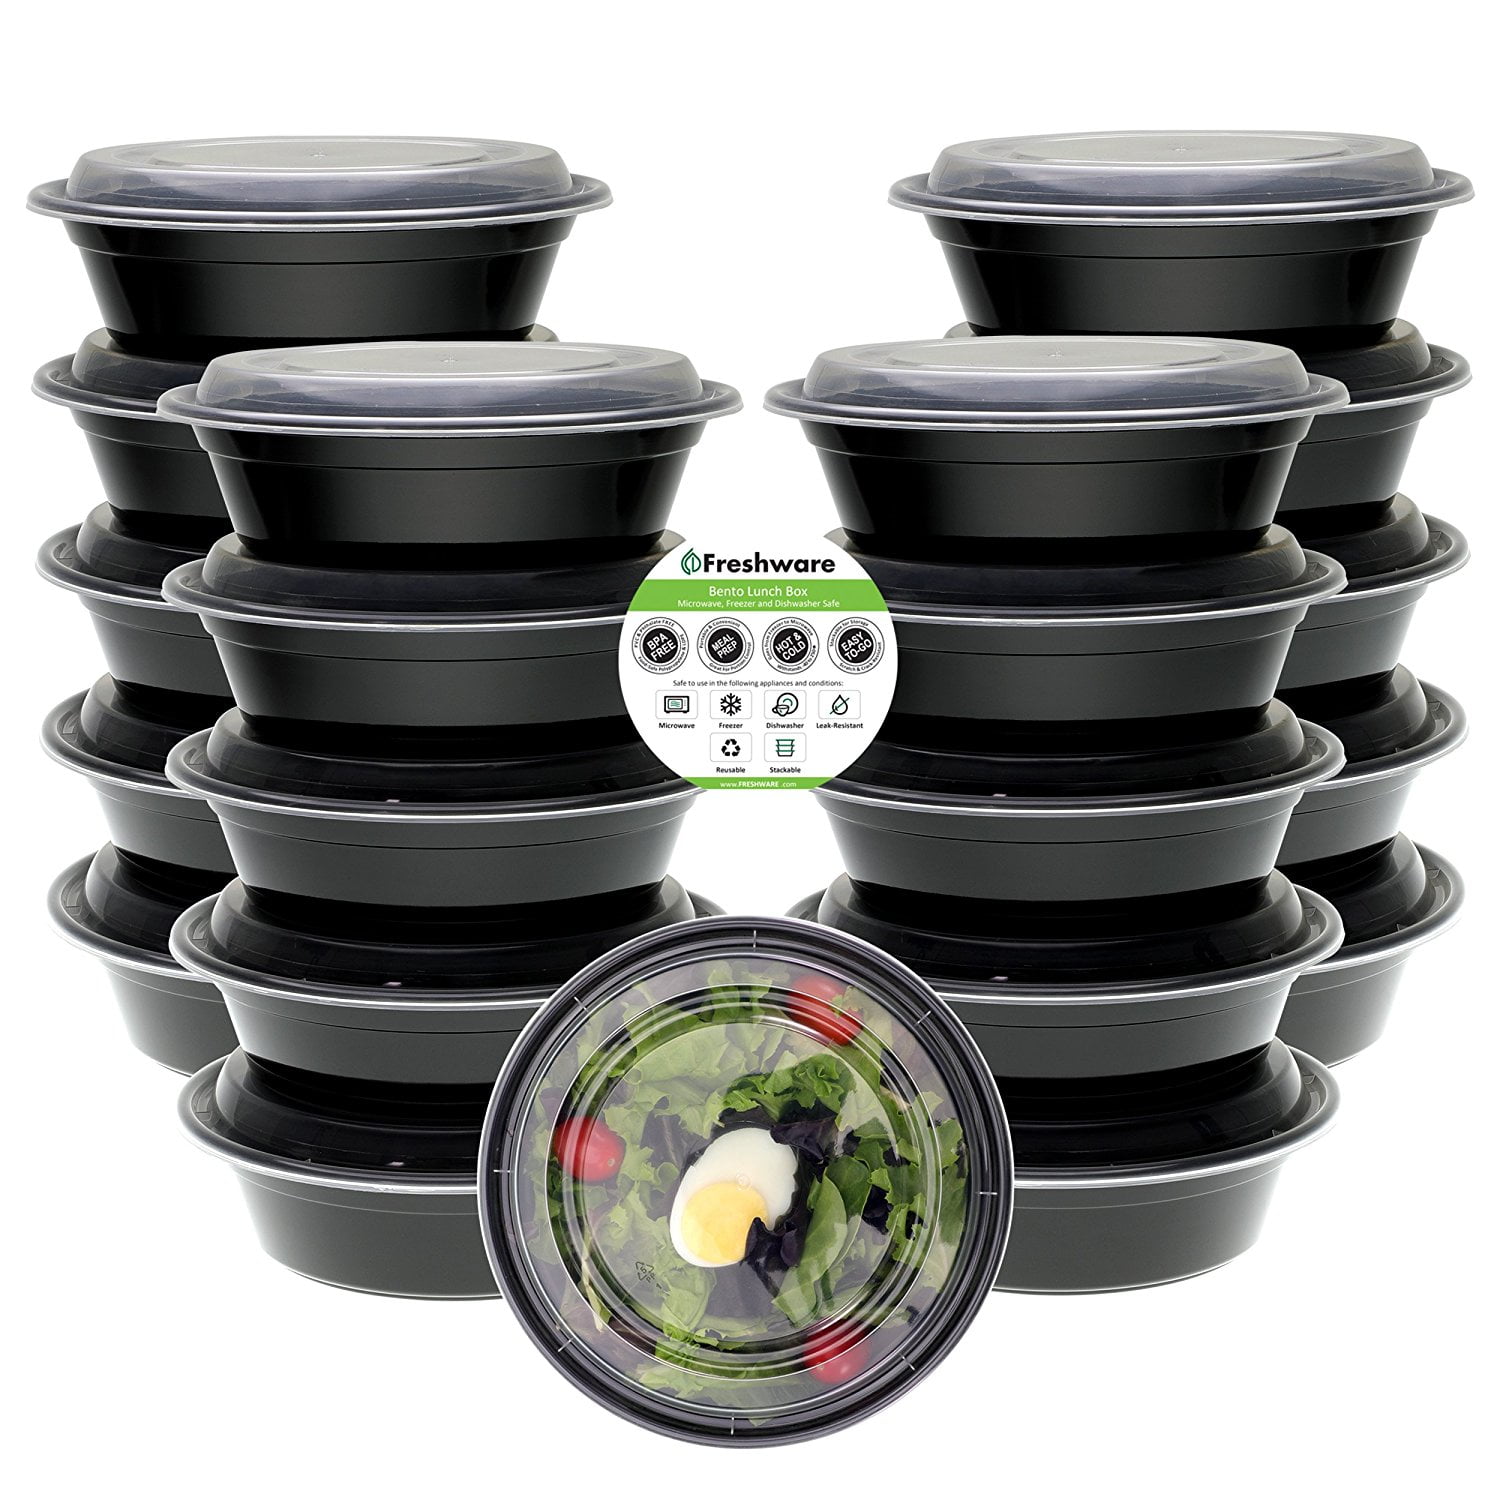 Freshware Meal Prep Containers 3 Compartments with Lids, Set of 21 